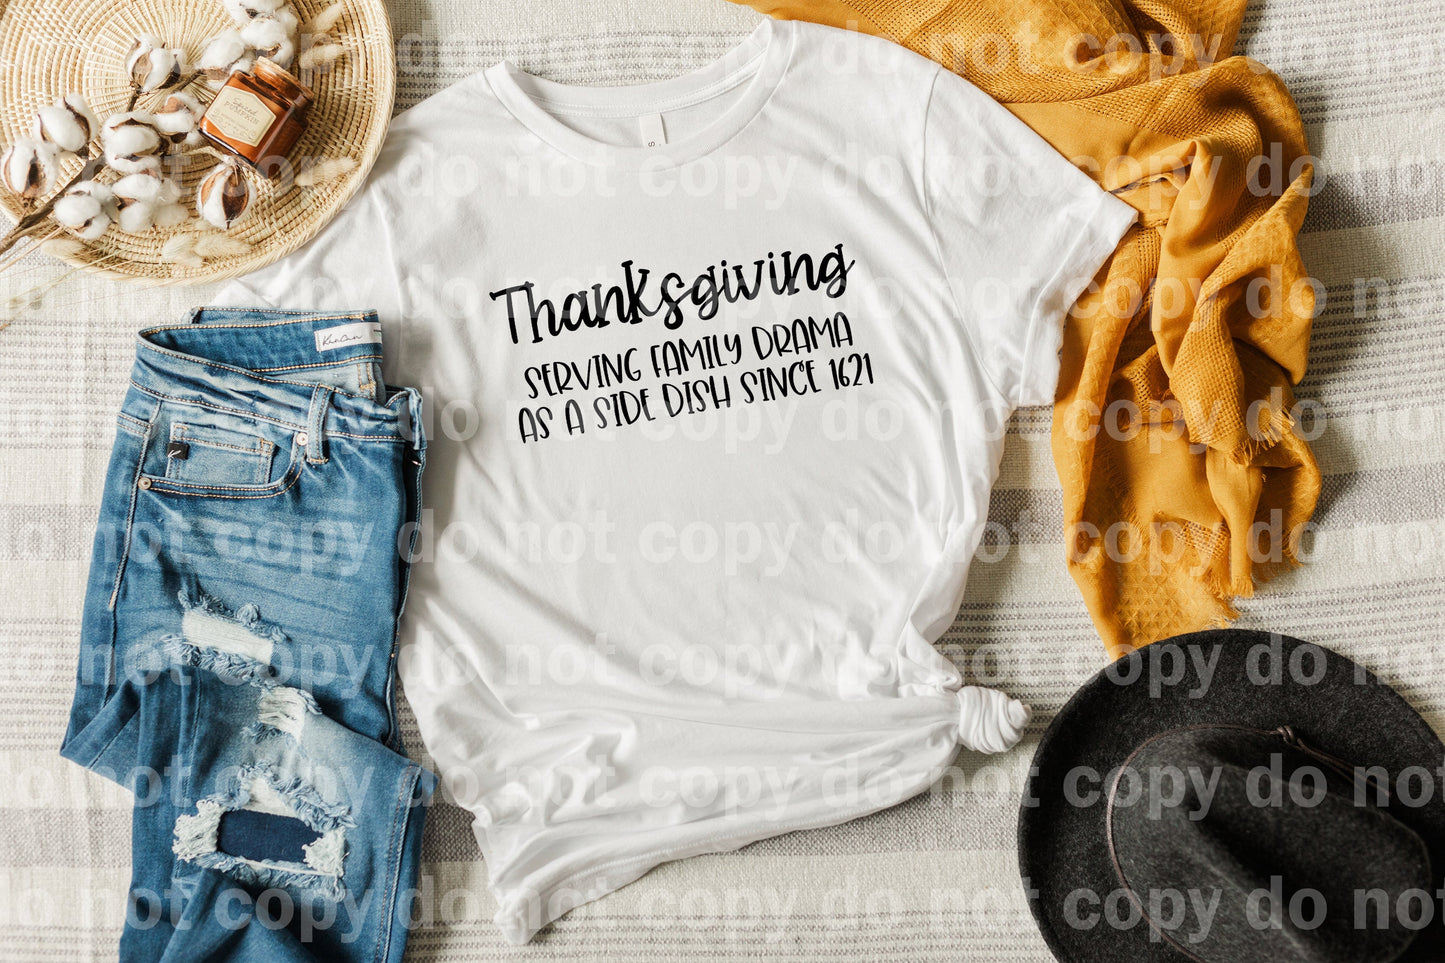 Thanksgiving Serving Family Drama As A Side Dish Since 1621 Black/White Dream Print or Sublimation Print